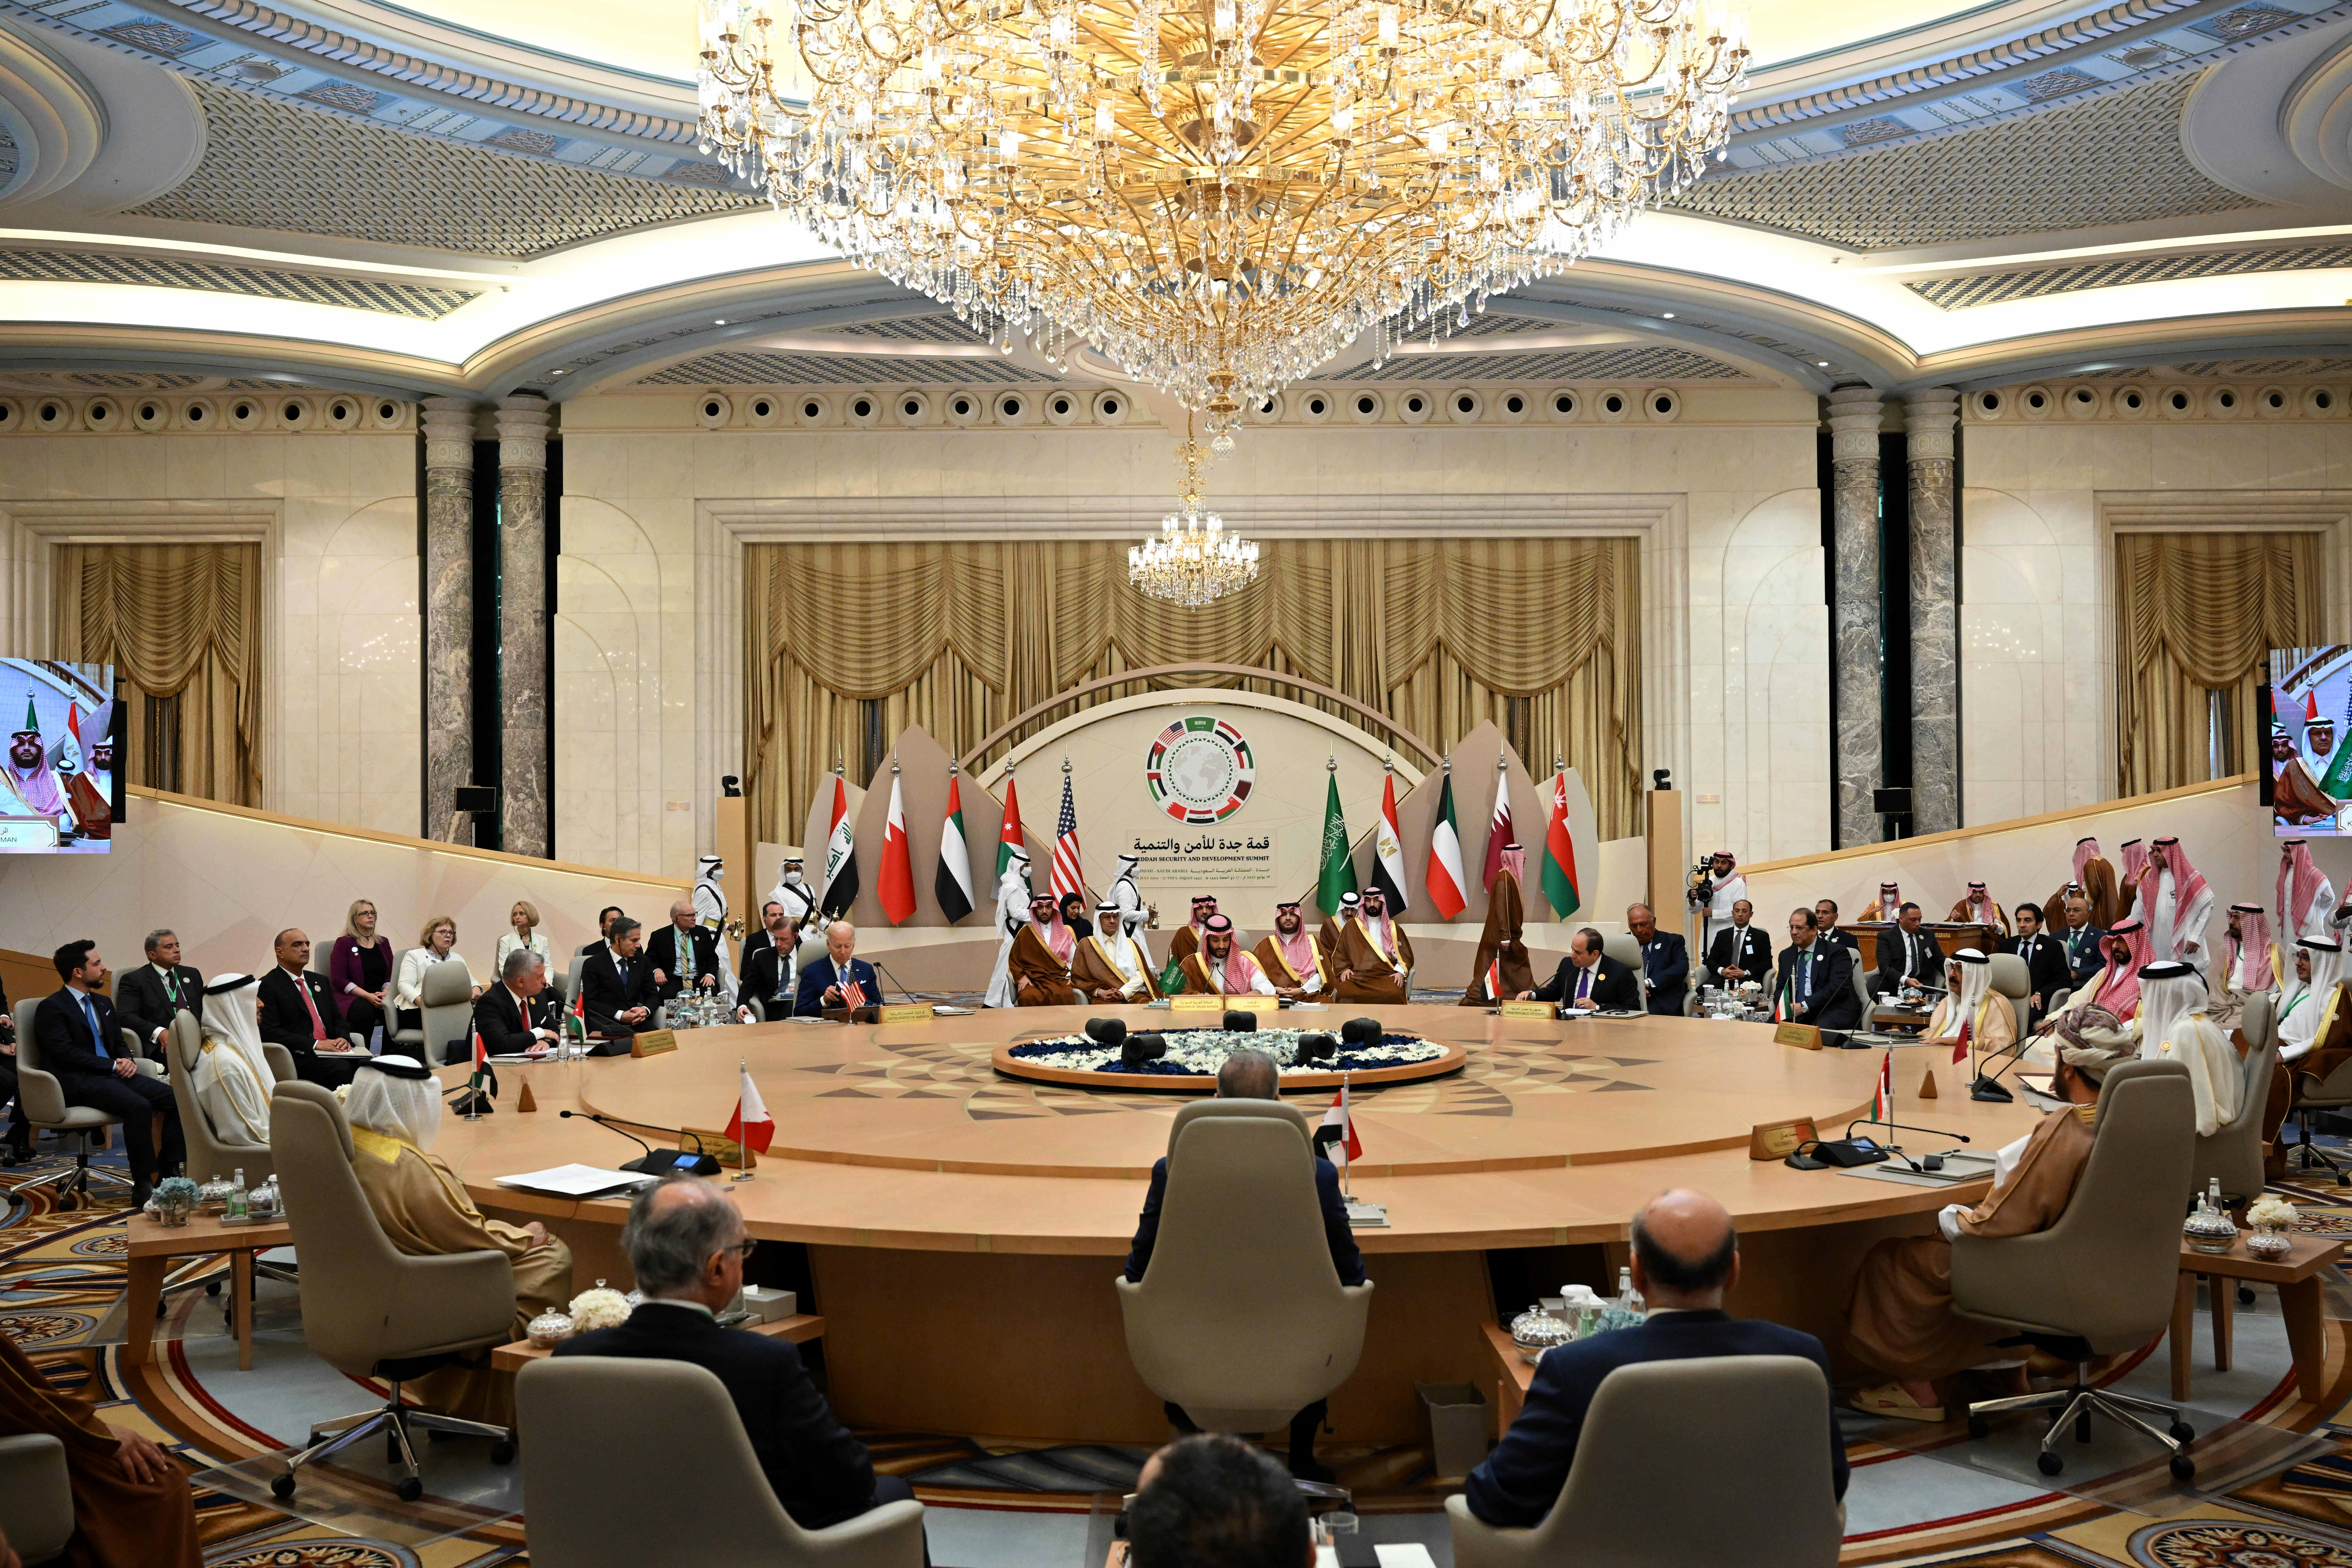 Jeddah SummitJeddah Summit: Leaders vow for security, stability in Middle East